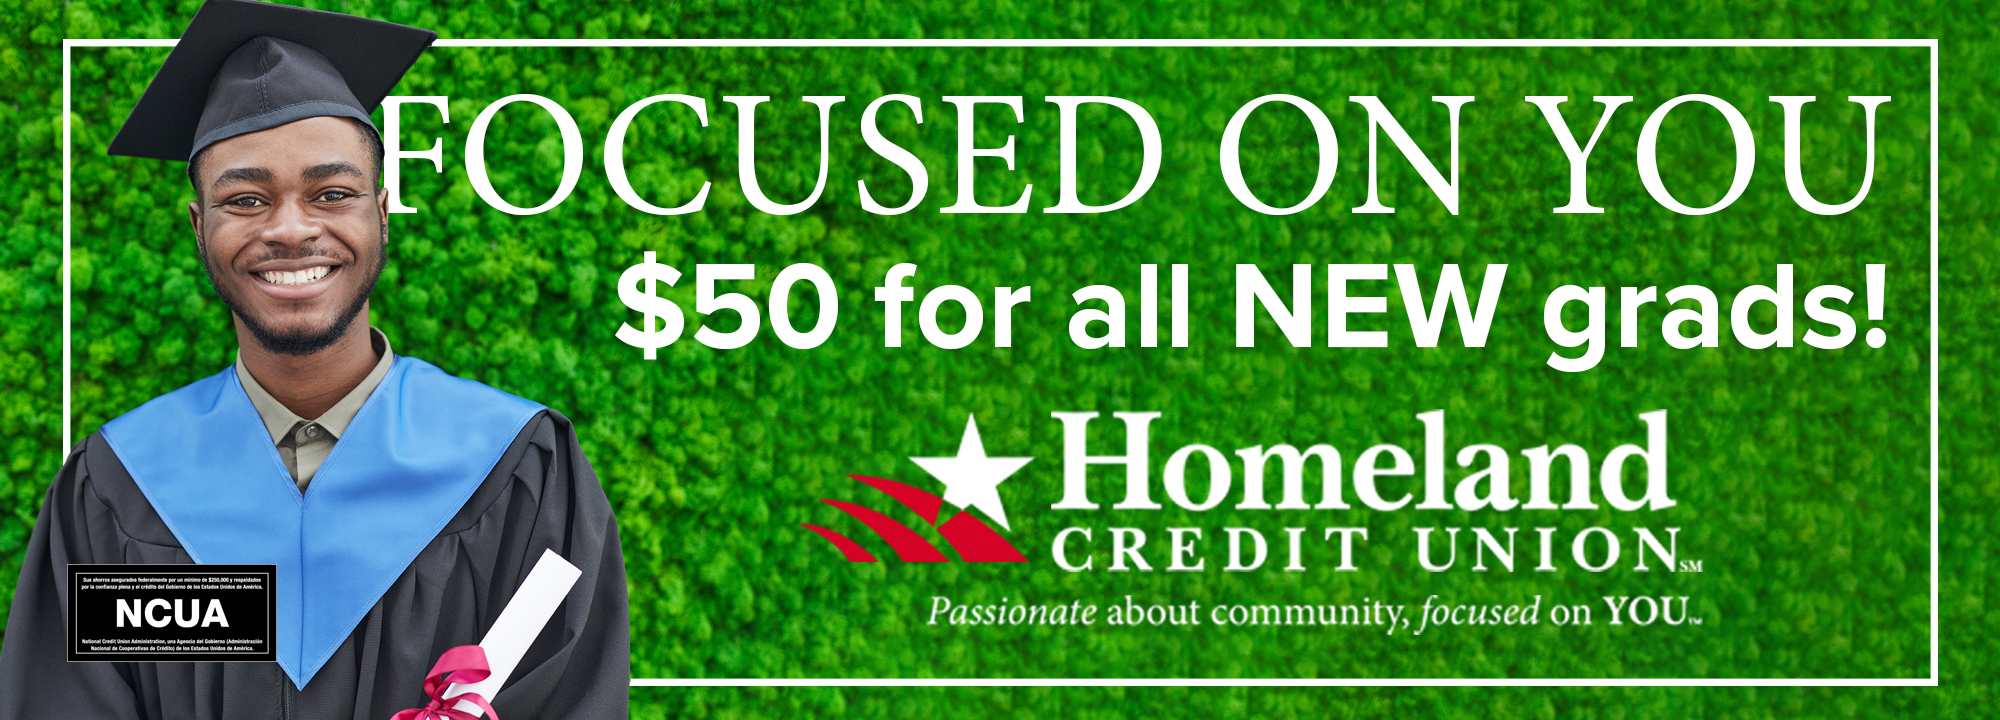 Focused on you. $50 for all NEW grads! Click for more info. Homeland Credit Union. *2023 high school and college graduates, please bring in your diploma and we will deposit $50 into your account. new members welcome! Offer must be redeemed by 8/31/23